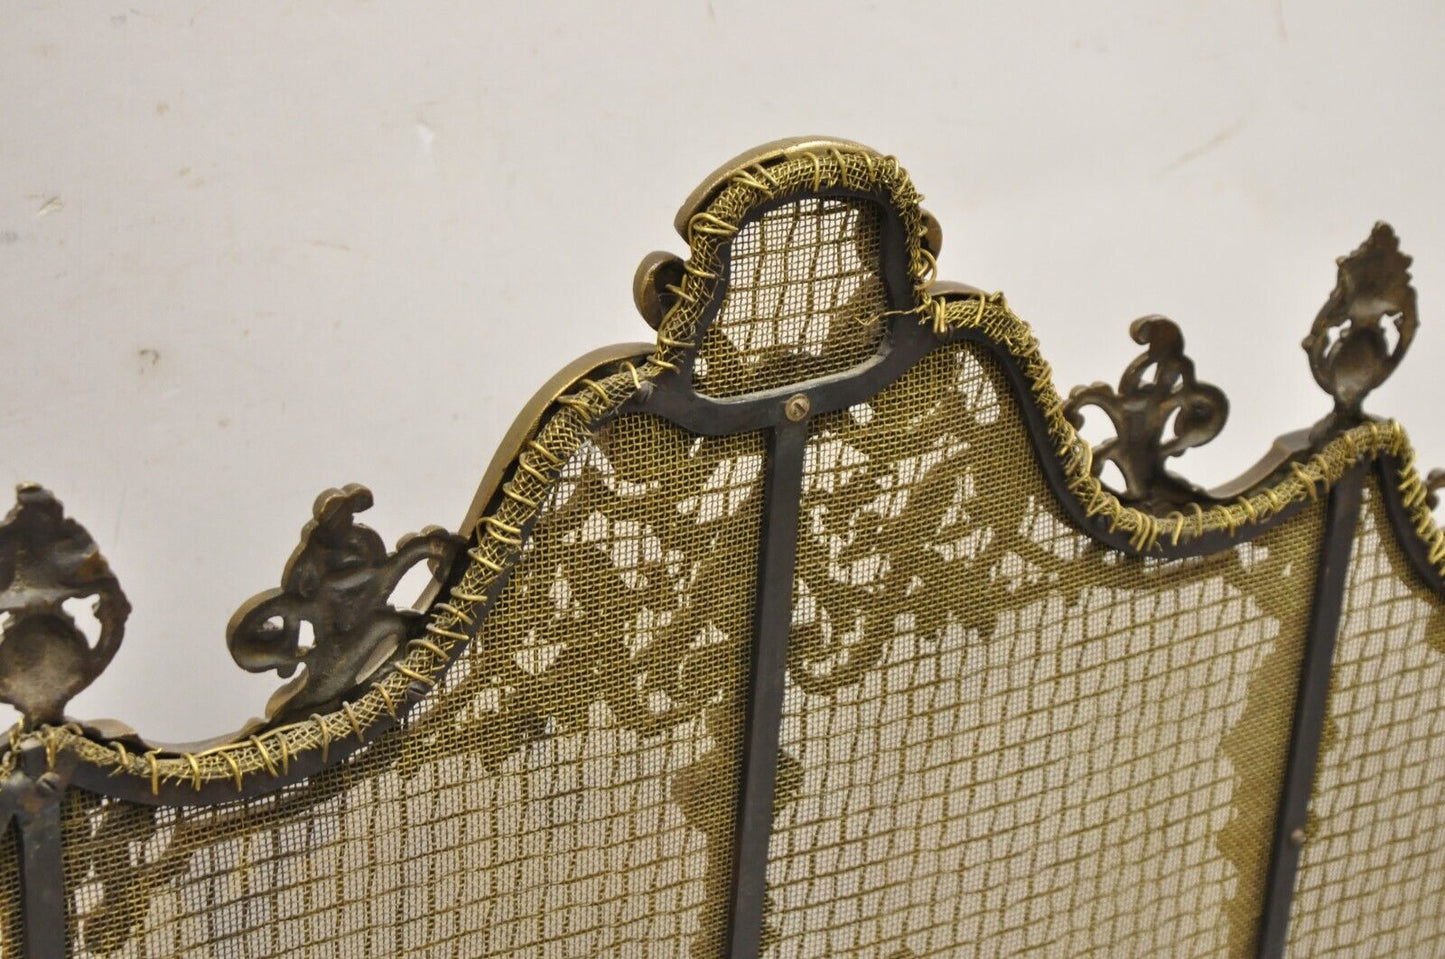 Antique French Renaissance Baroque Style Figural Bronze Mesh Fireplace Screen